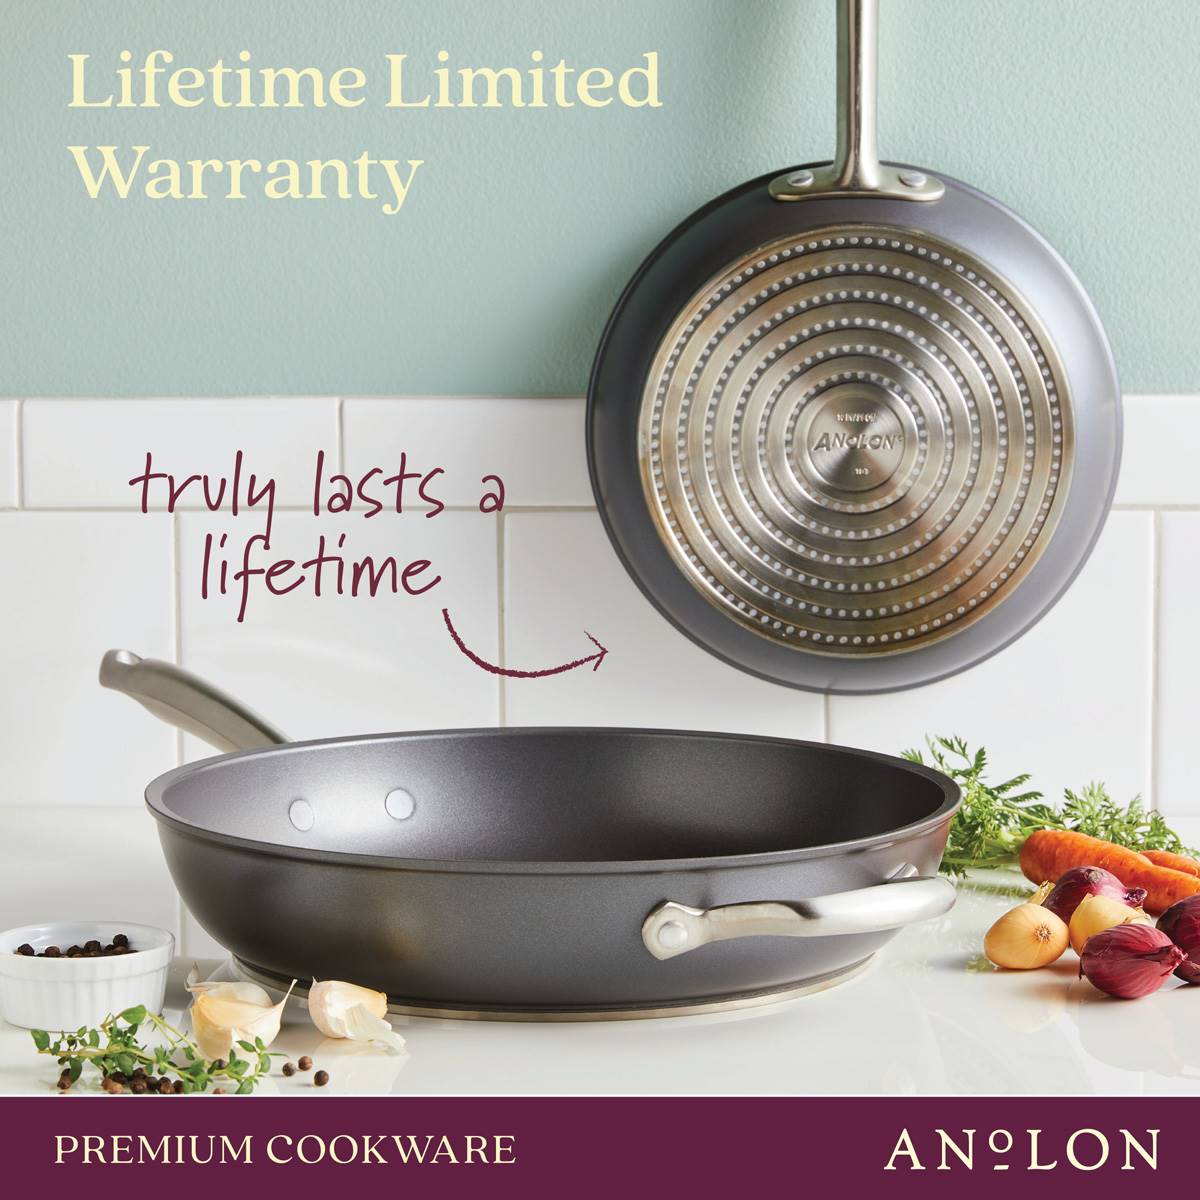 Anolon(R) Accolade 12in. Hard-Anodized Nonstick Deep Frying Pan